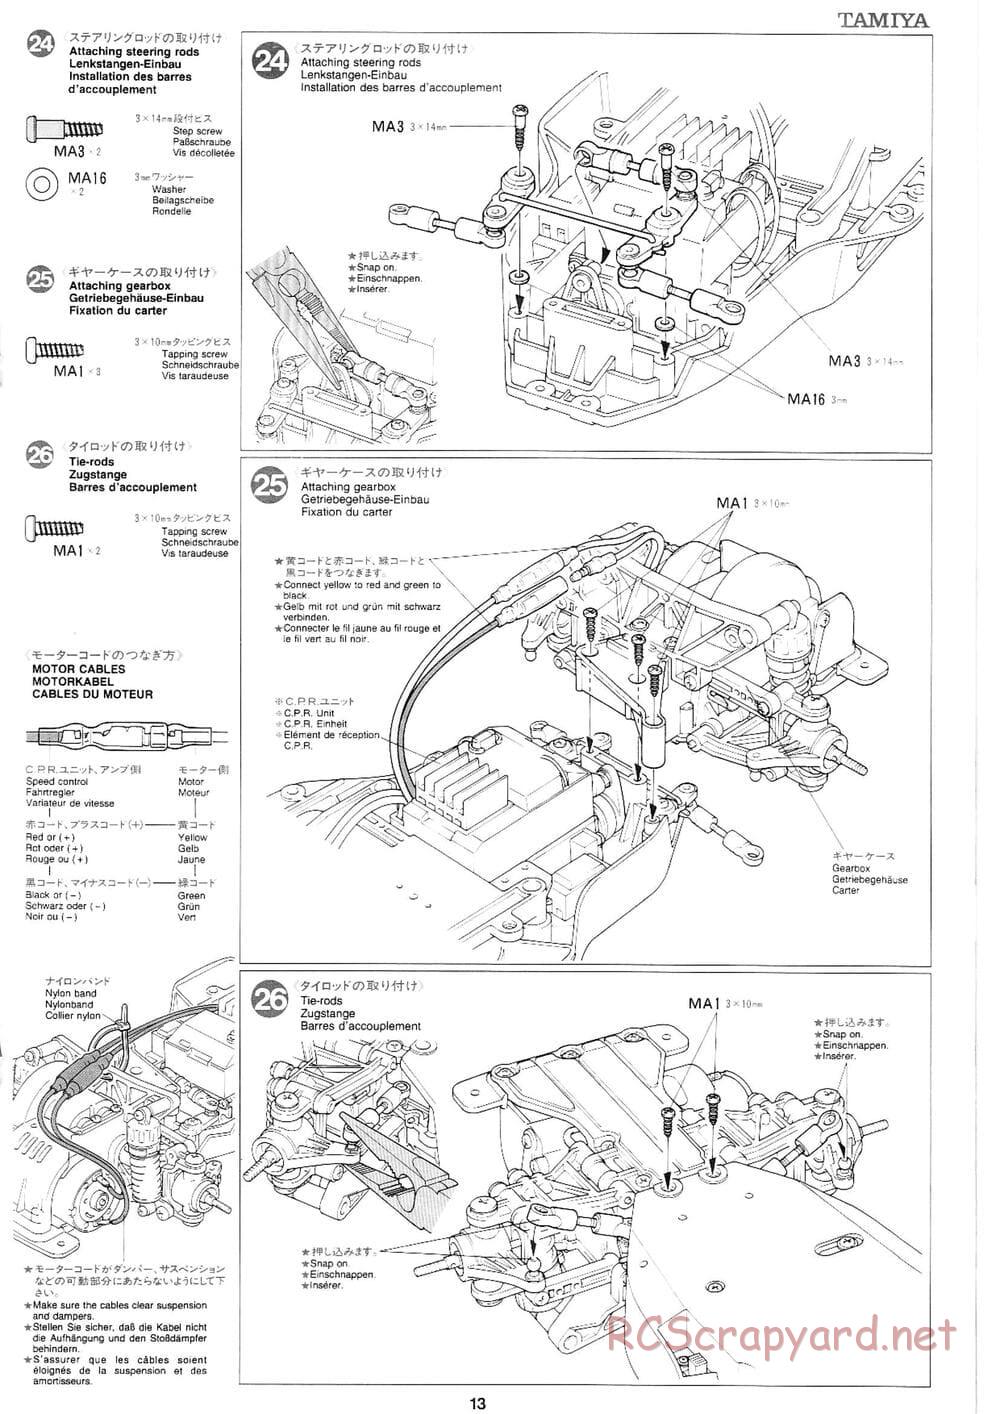 Tamiya - Volkswagen New Beetle - FF-01 Chassis - Manual - Page 11